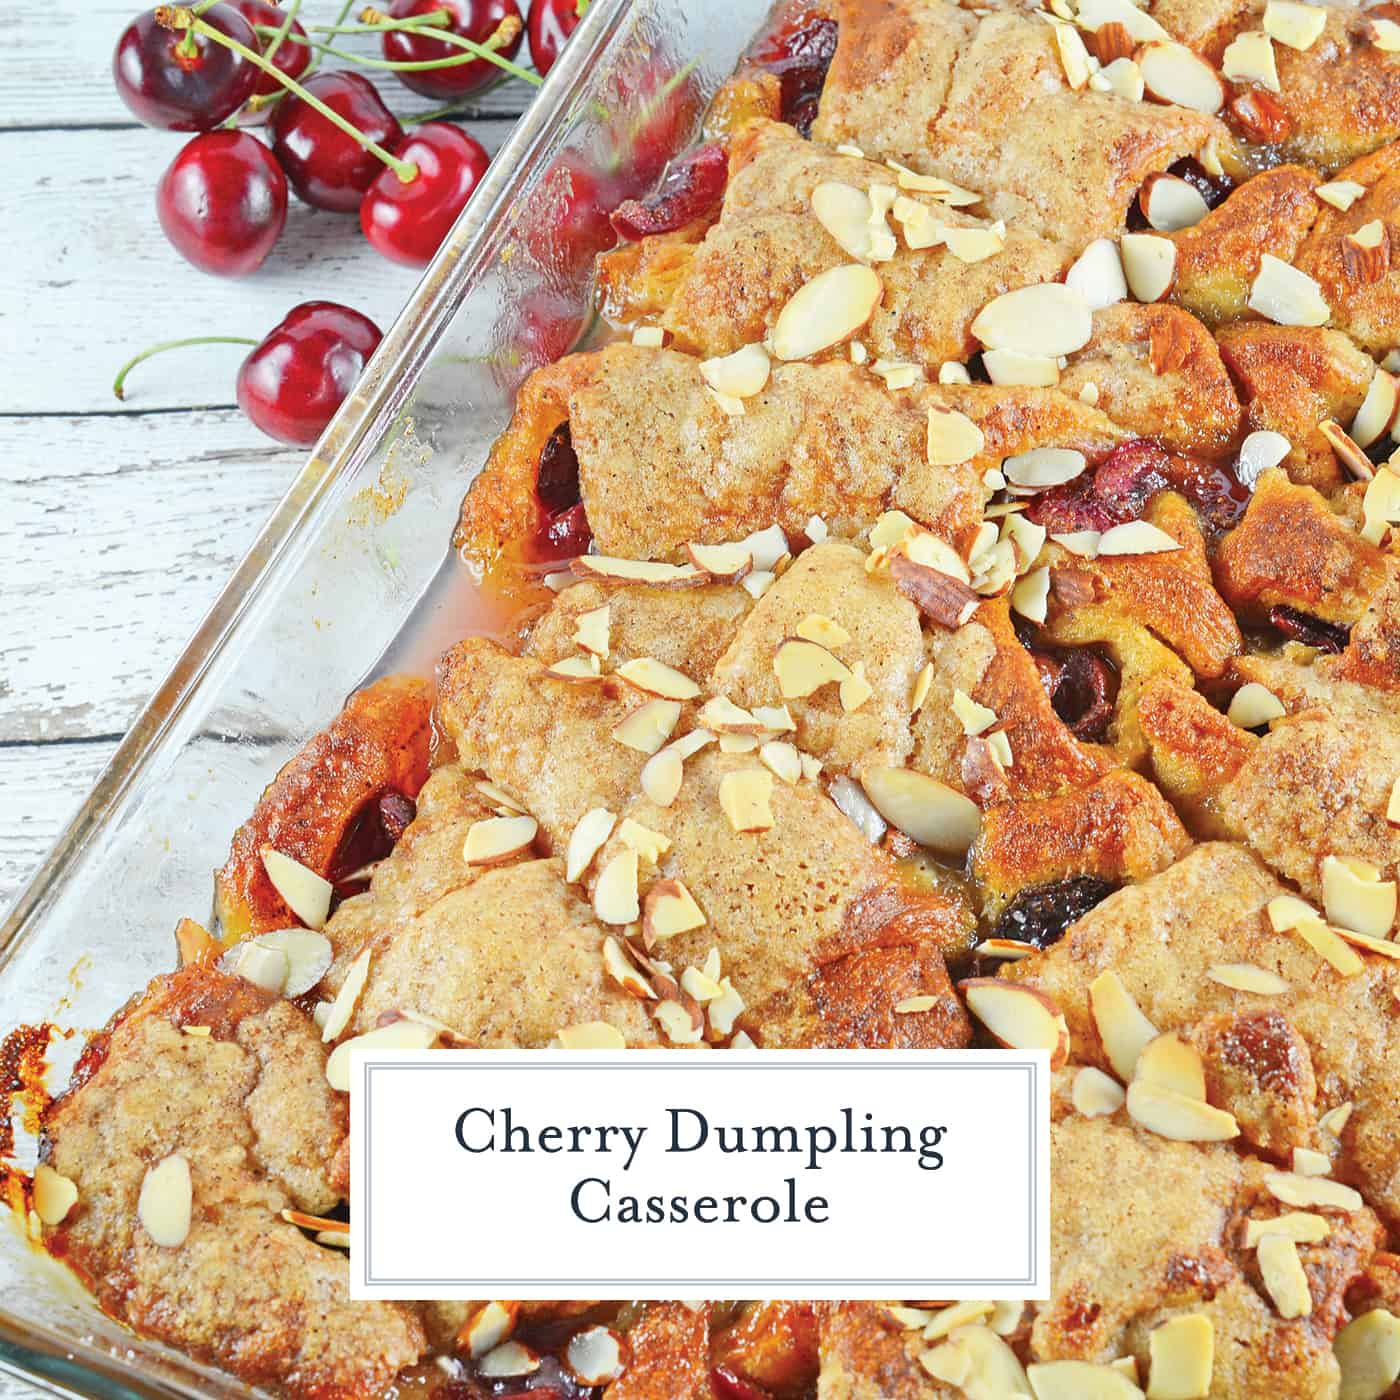 Cherry Dumpling Casserole is a great recipe that use cherries in a tasty and easy dessert! Easy to make and delicious to eat, what could be better? #fruitdumplings #crescentrolldumplings www.savoryexperiments.com